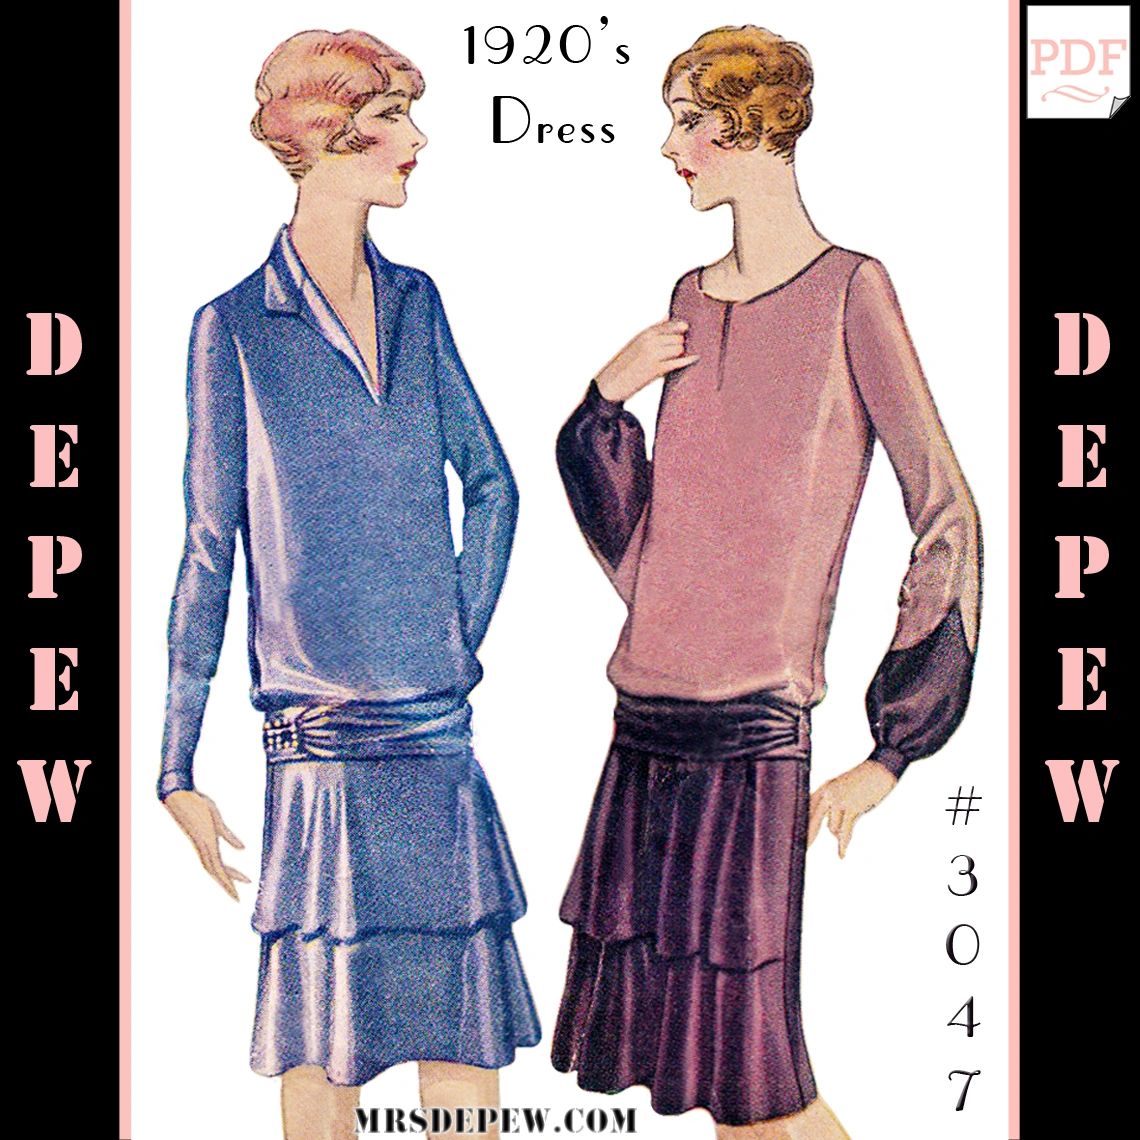 Fashions of the 1920s - Paperdolls and More – C Sews